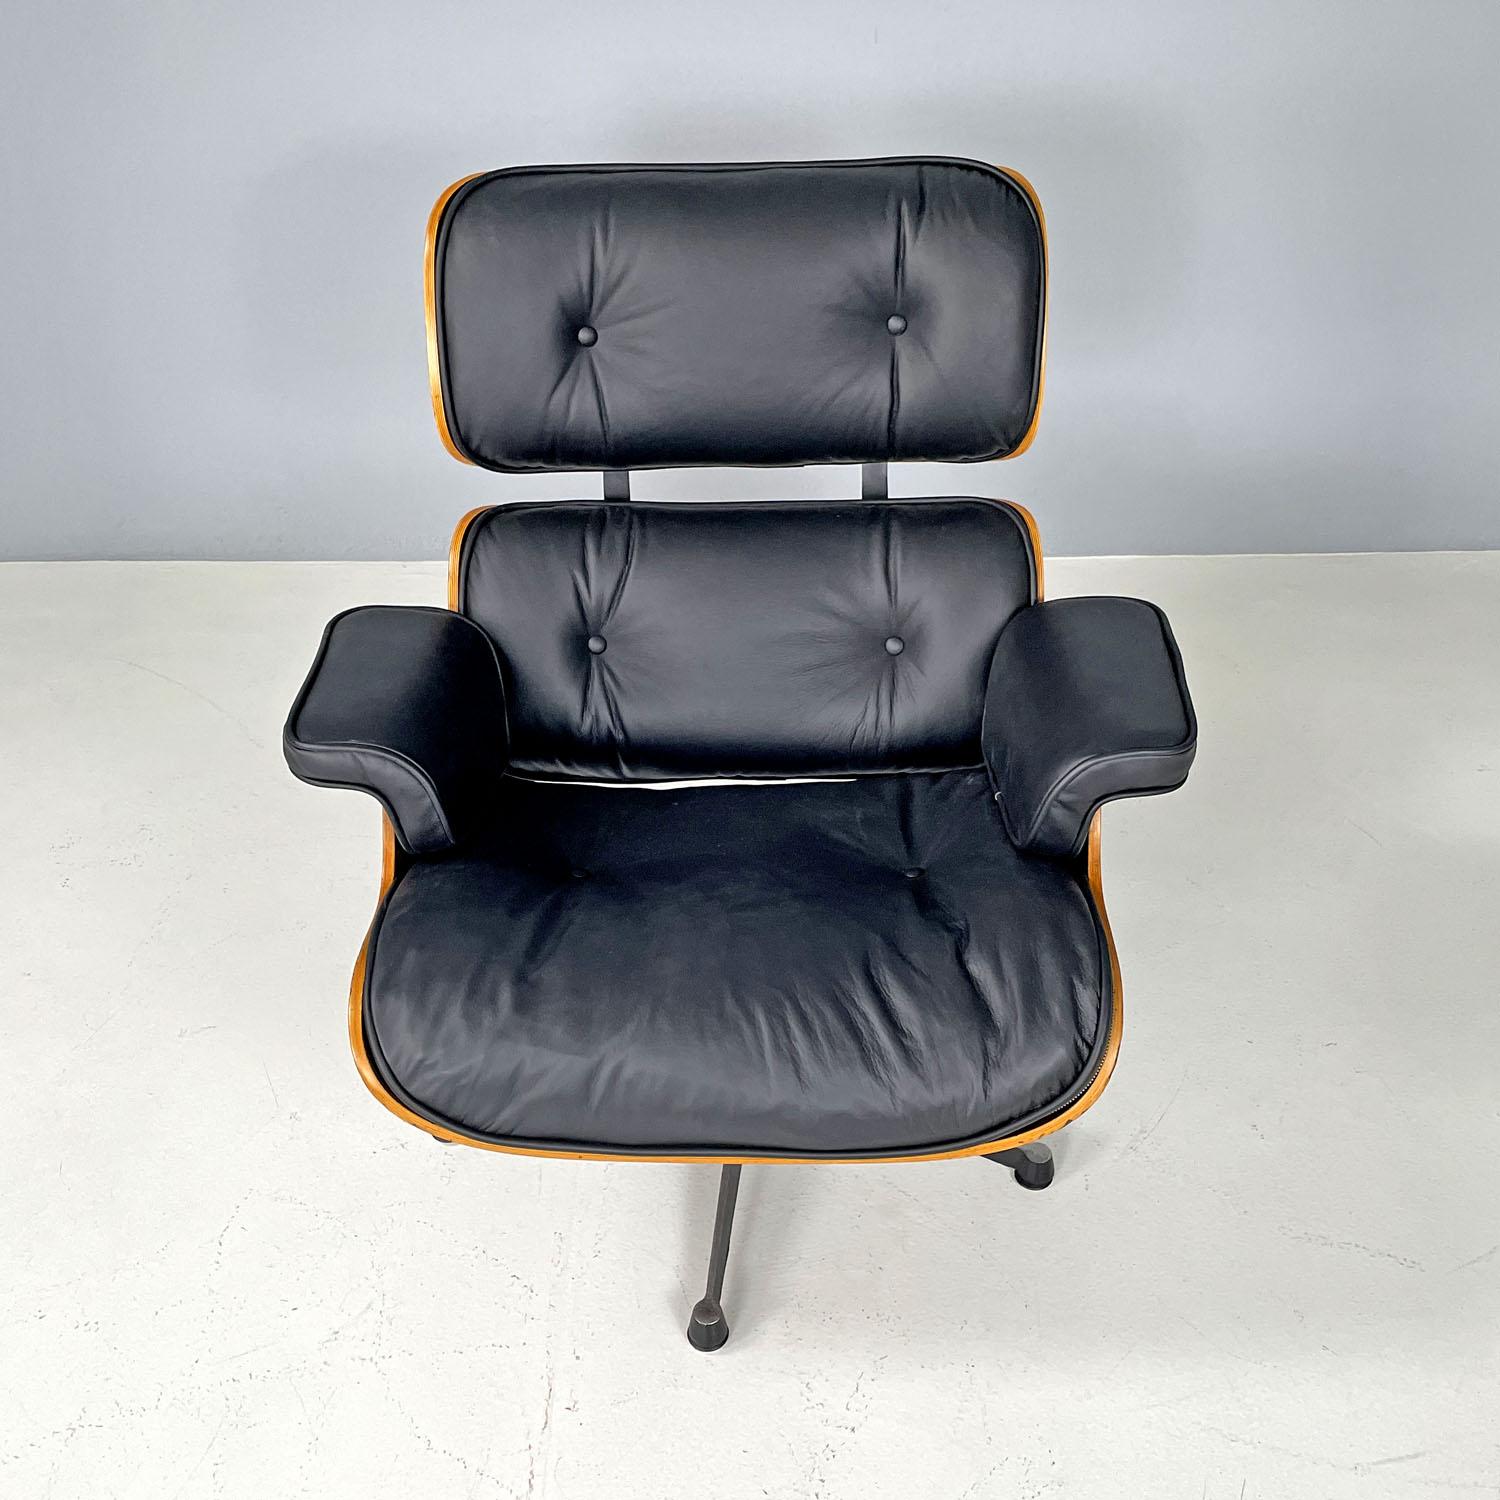 American modern black leather lounge chair 670 671 by Eames for Miller, 1970s For Sale 1